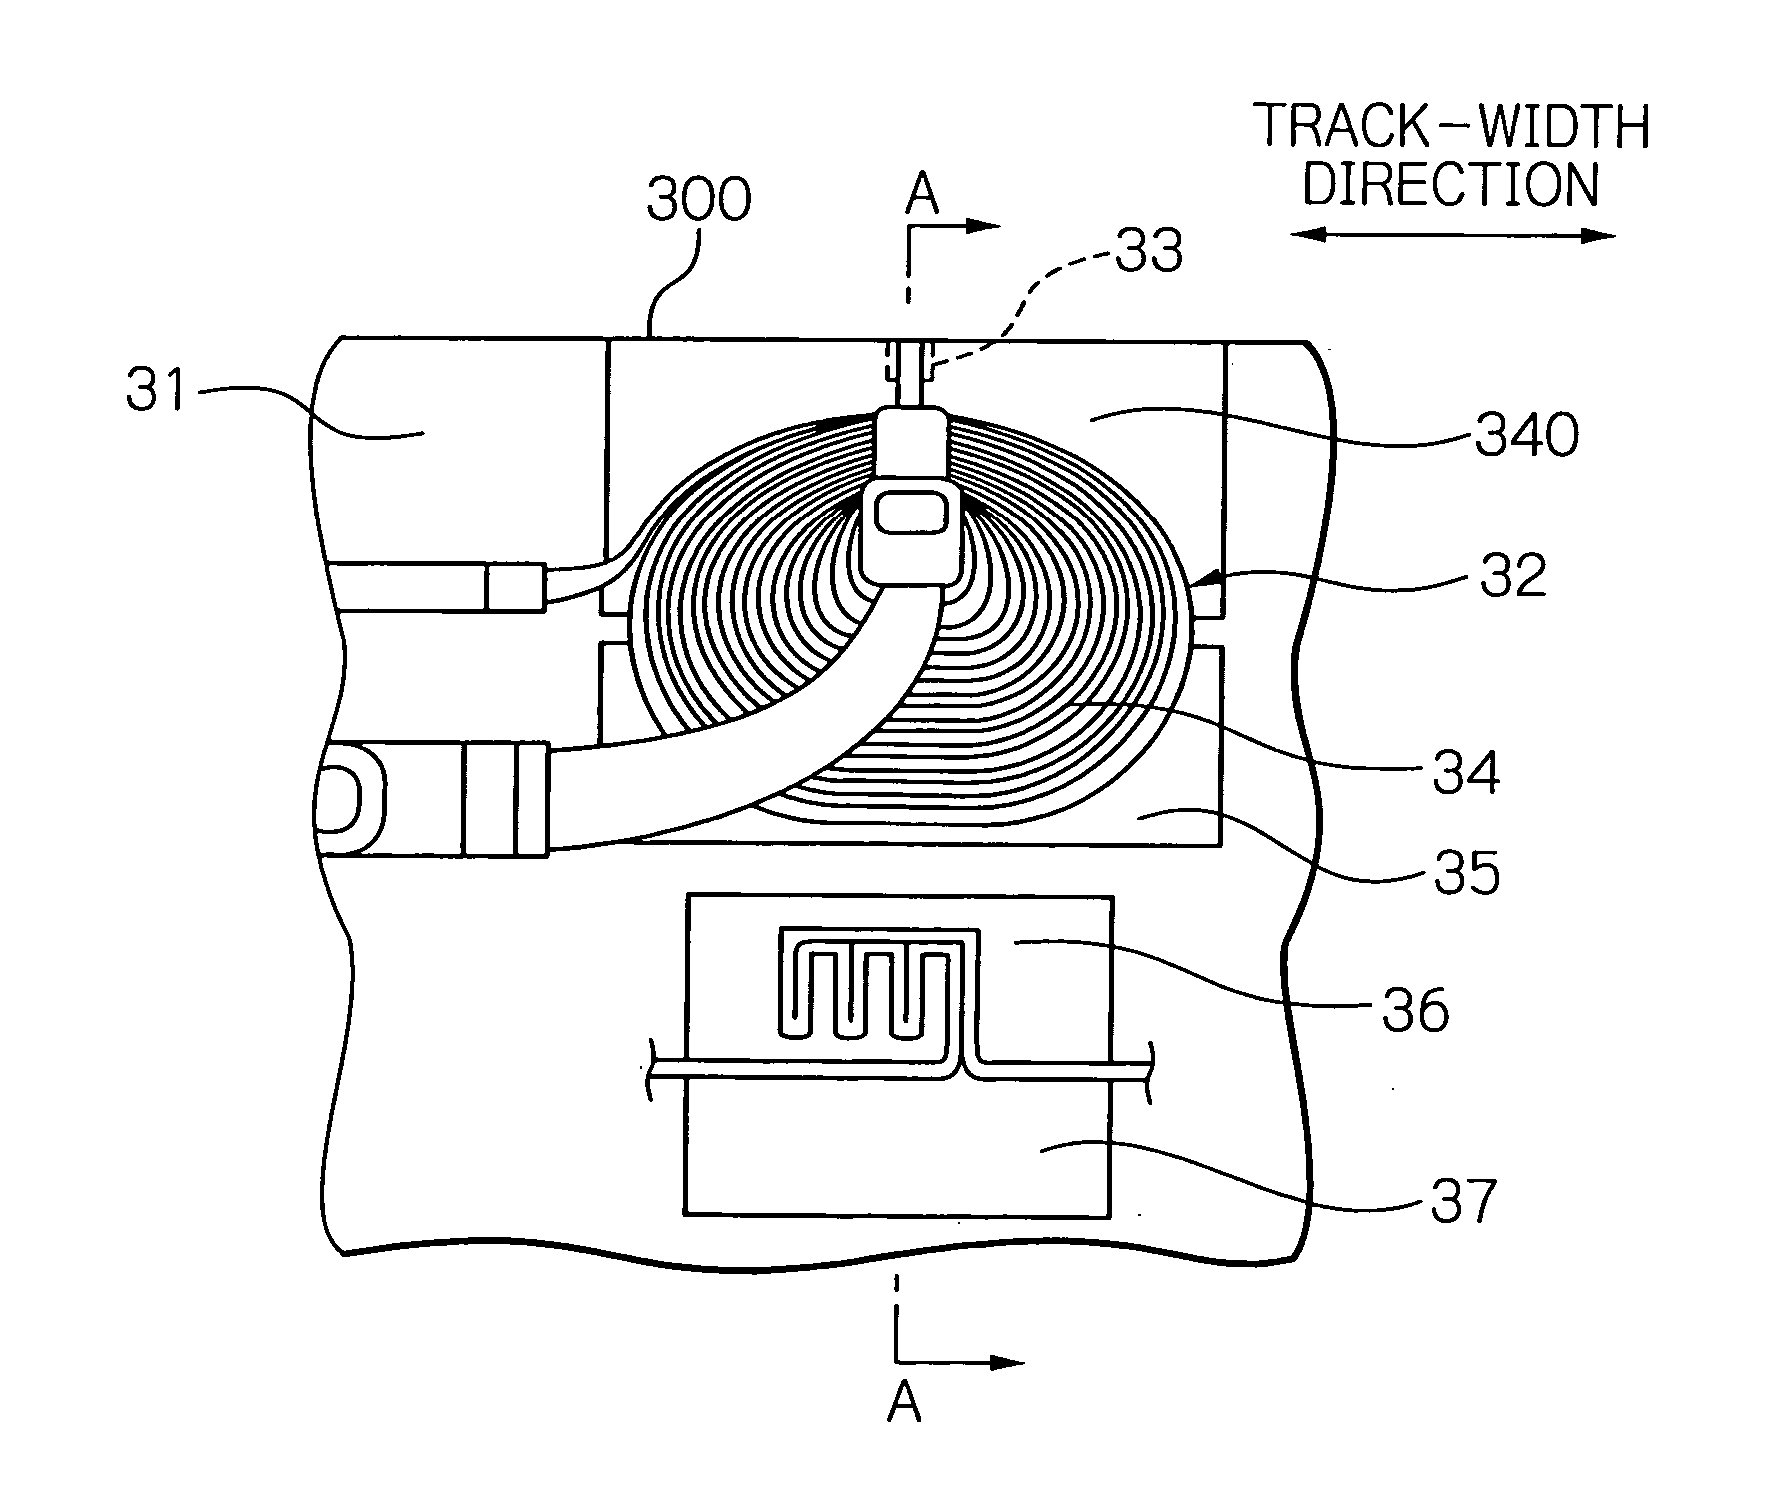 Thin-film magnetic head with heating element and heatsink